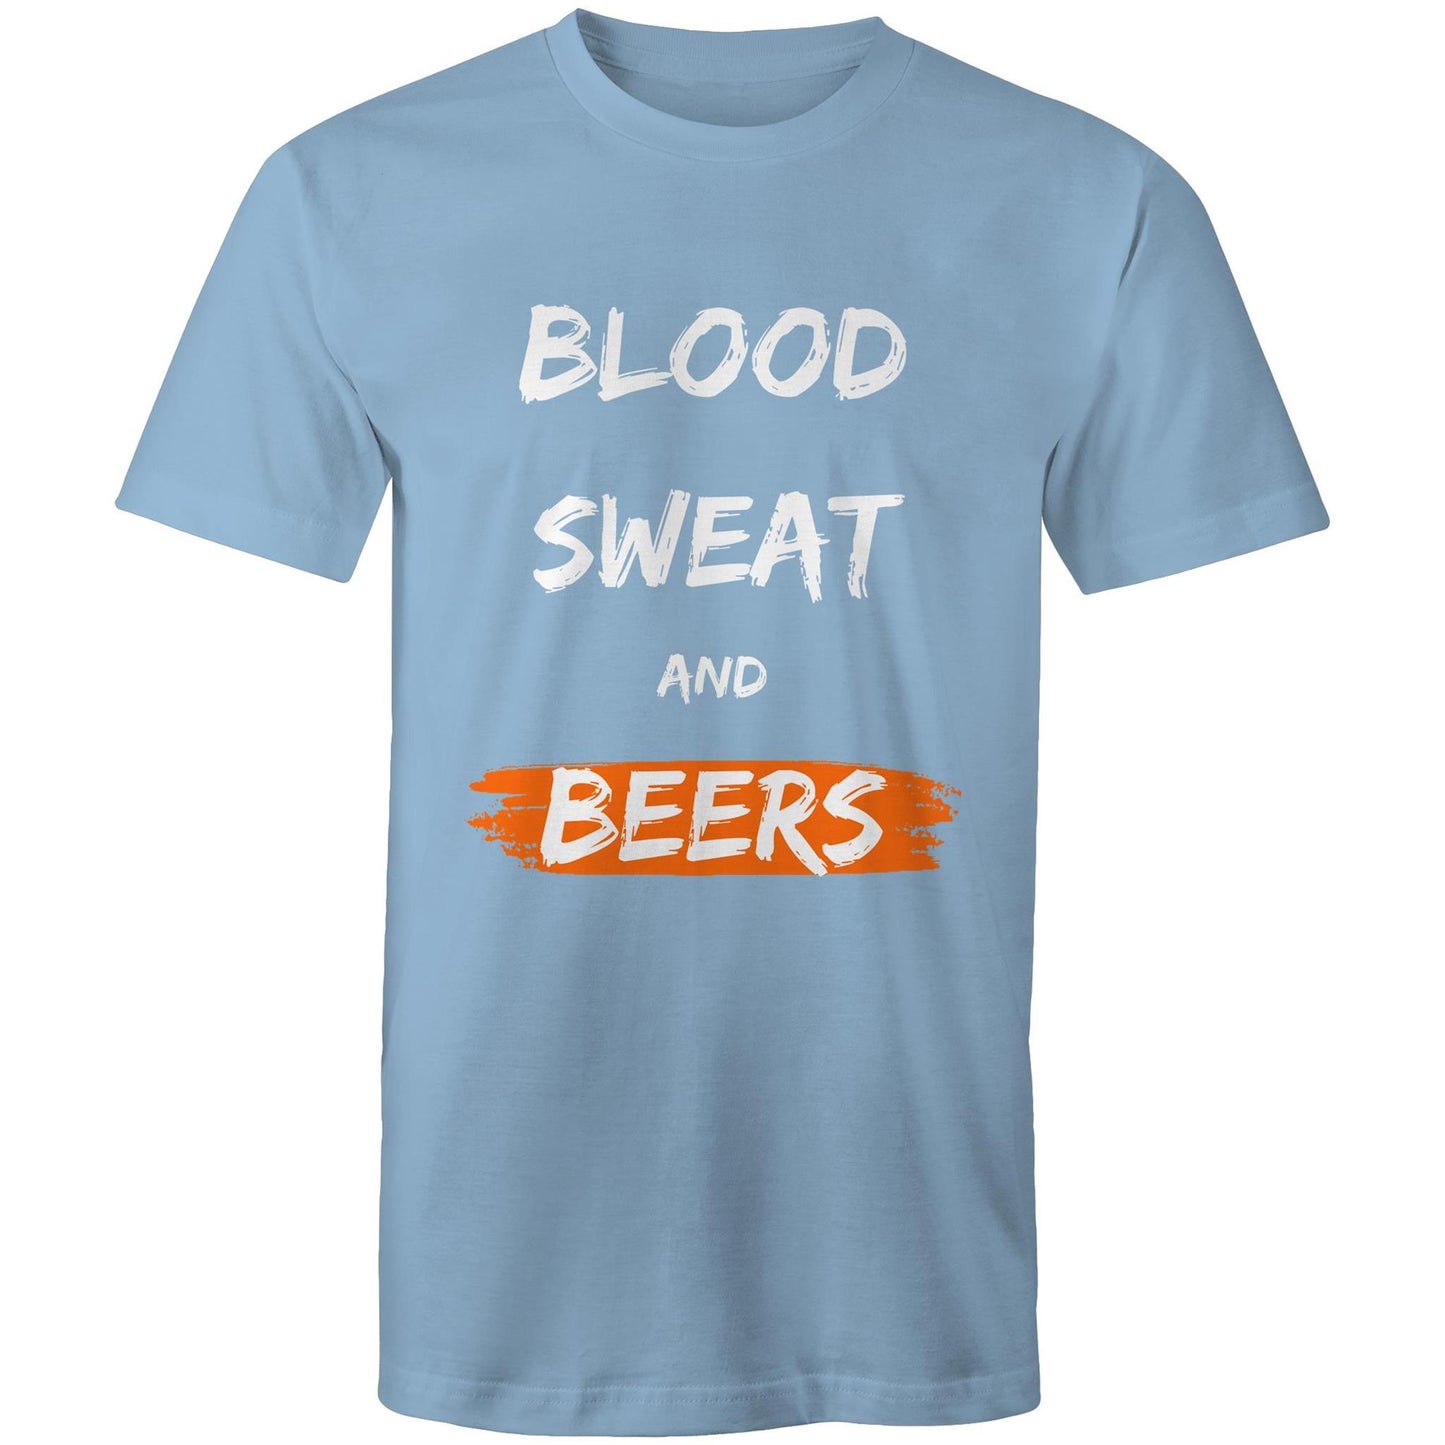 Blood, Sweat and Beers - Mens T-Shirt